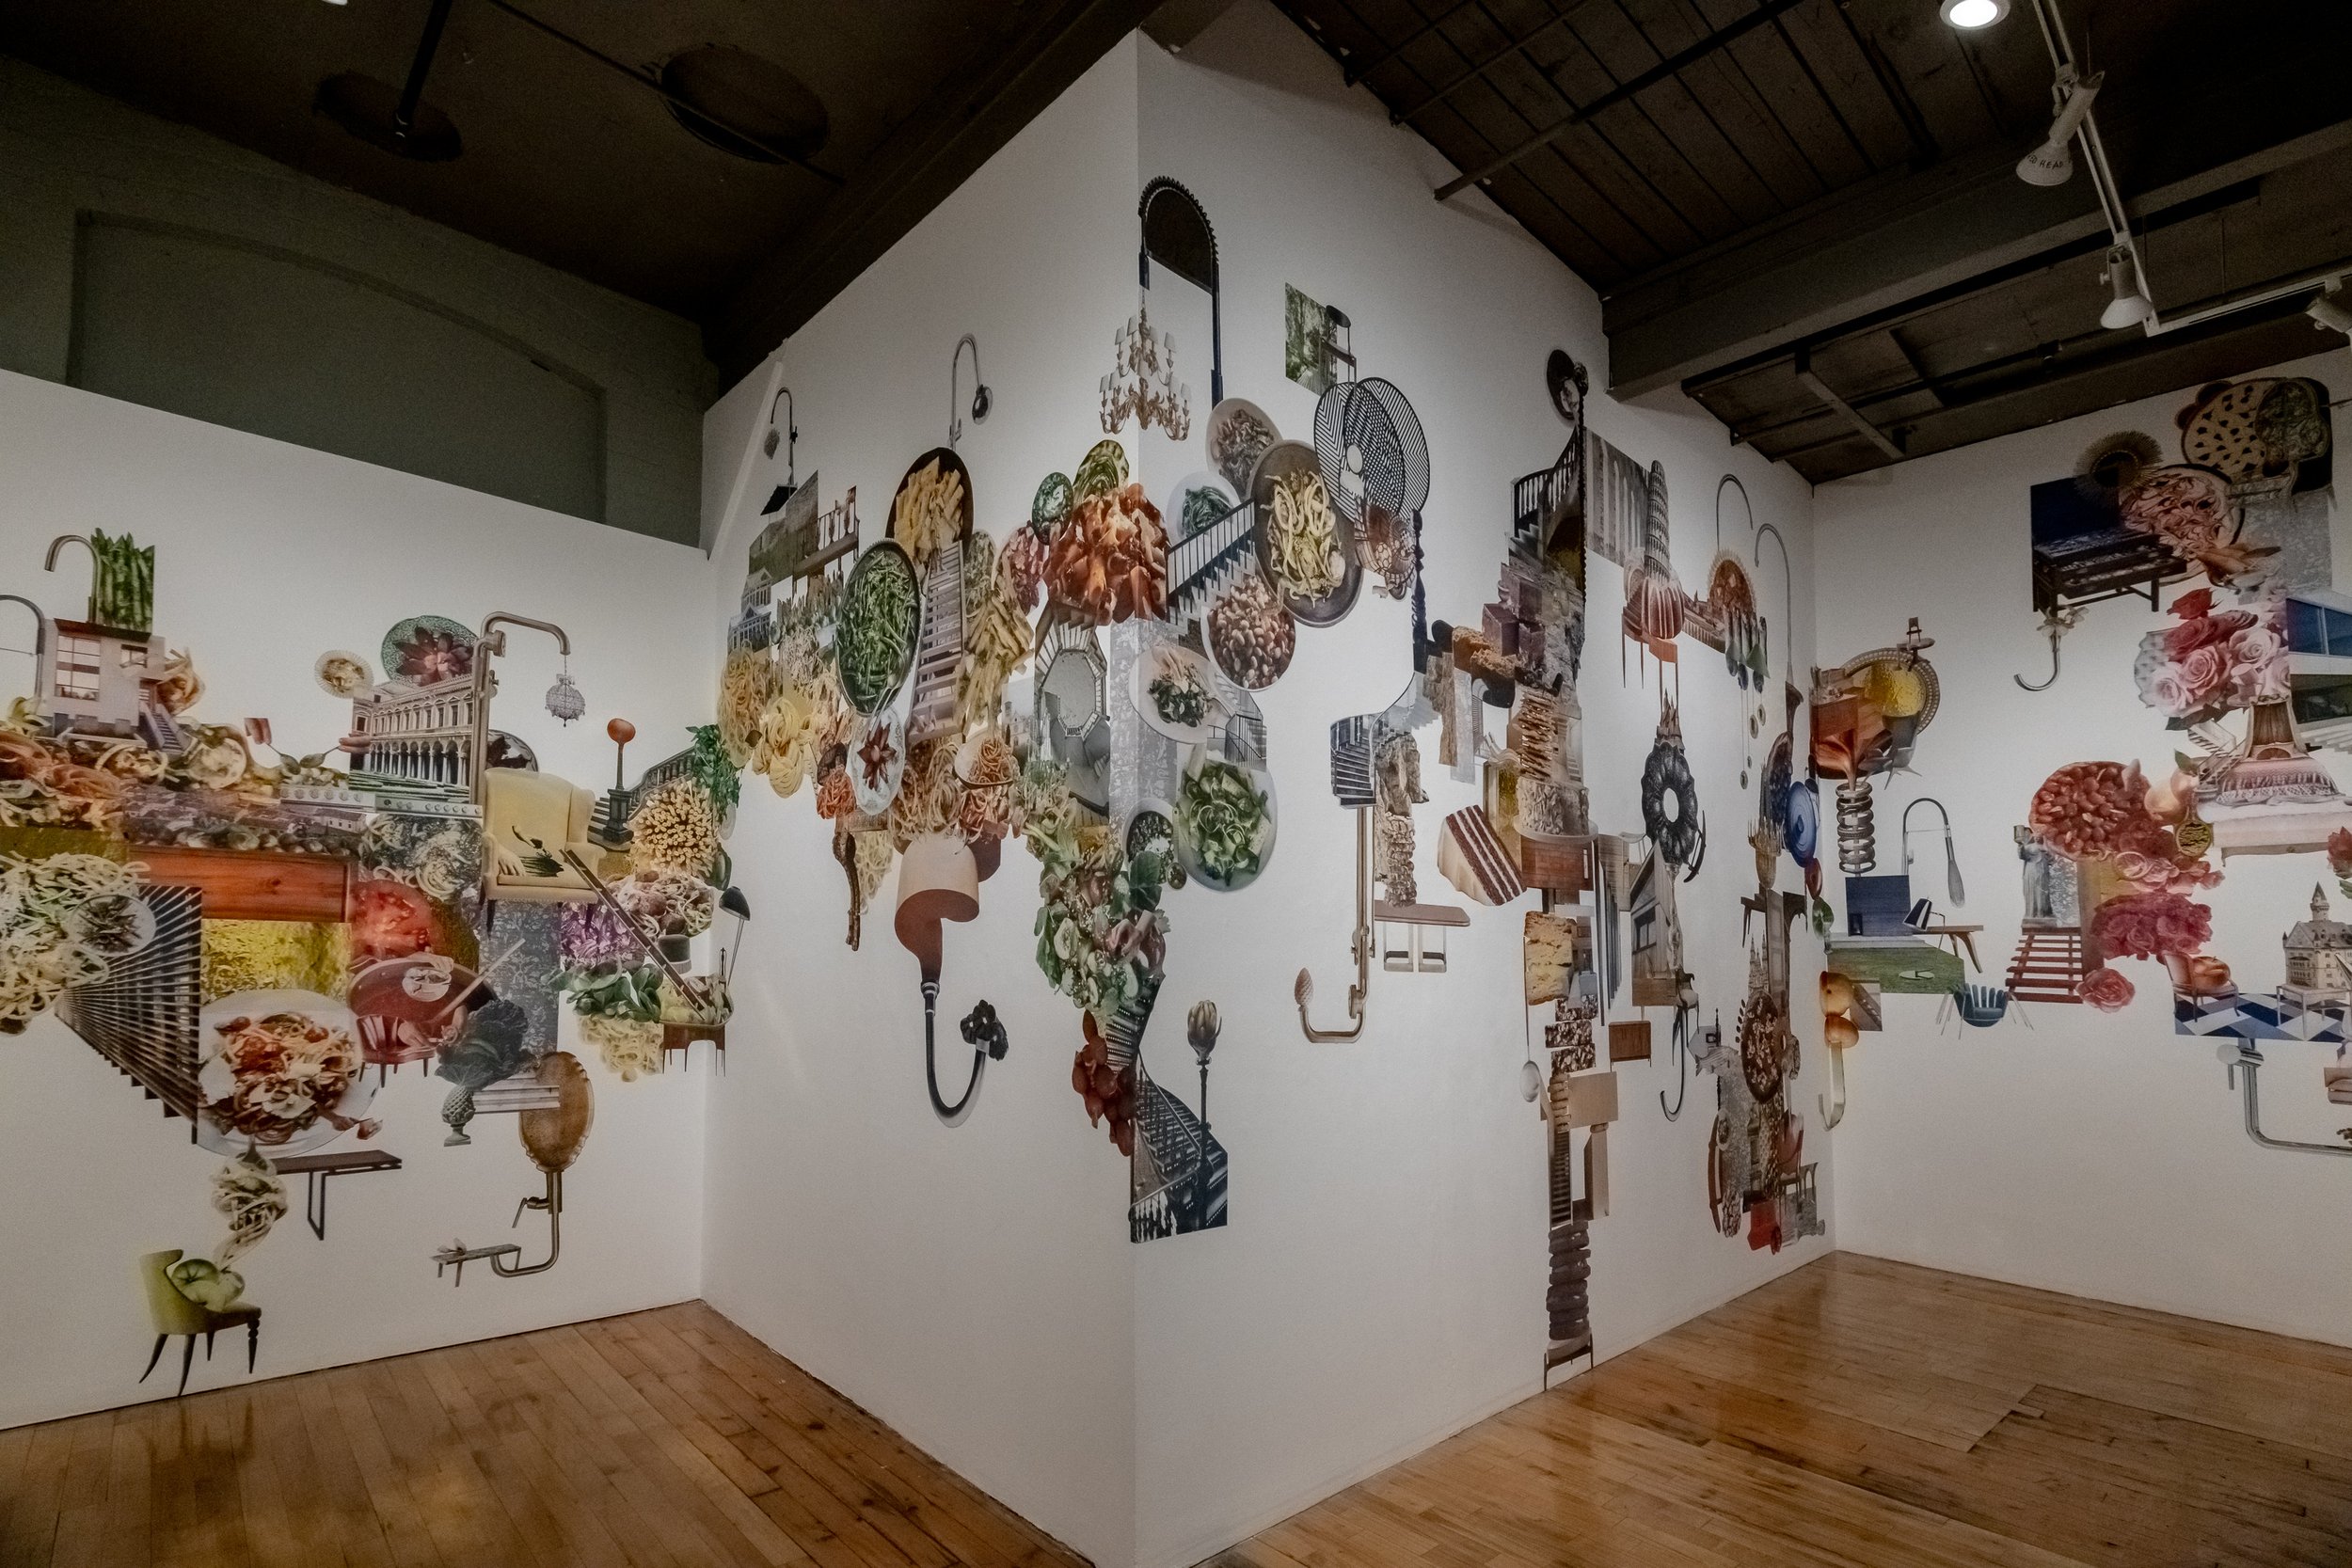  Gorge, 2019 Installation view at Red Head Gallery Hand cut collage and mixed media  Picture by Peggy Taylor Reid, 2019 